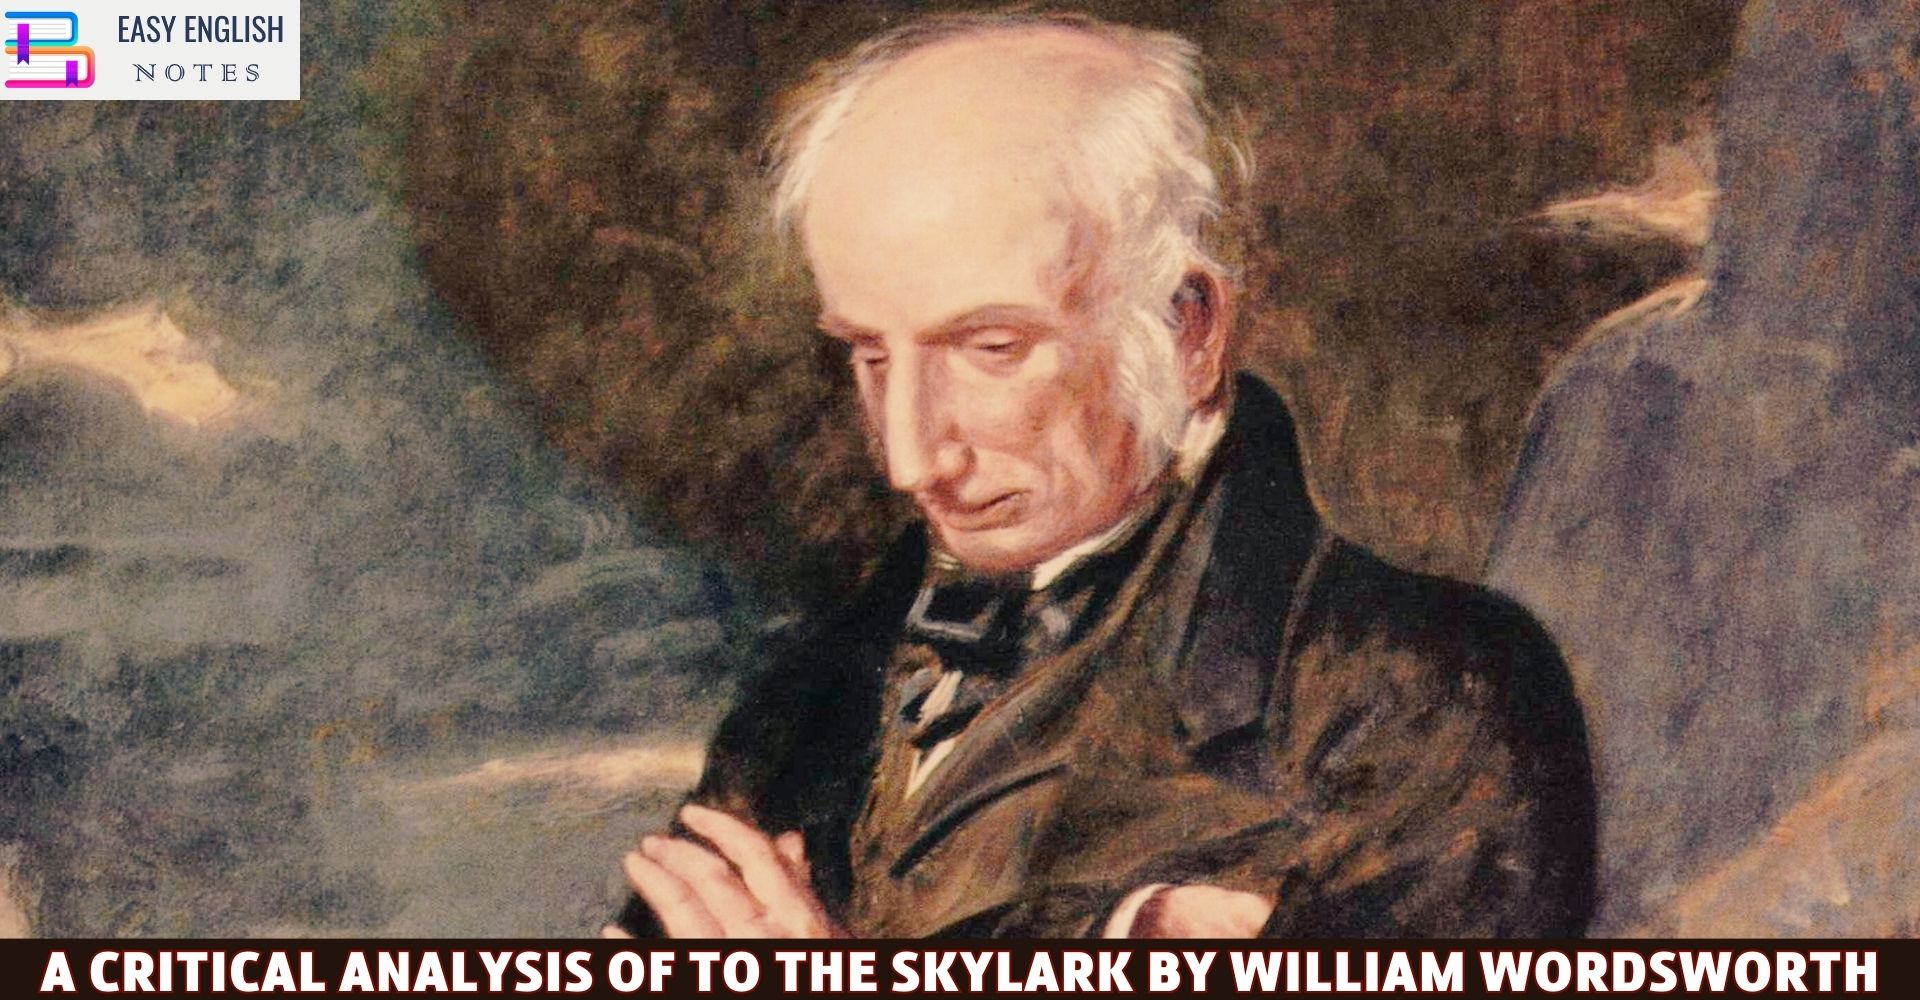 A Critical Analysis of To the Skylark by William Wordsworth